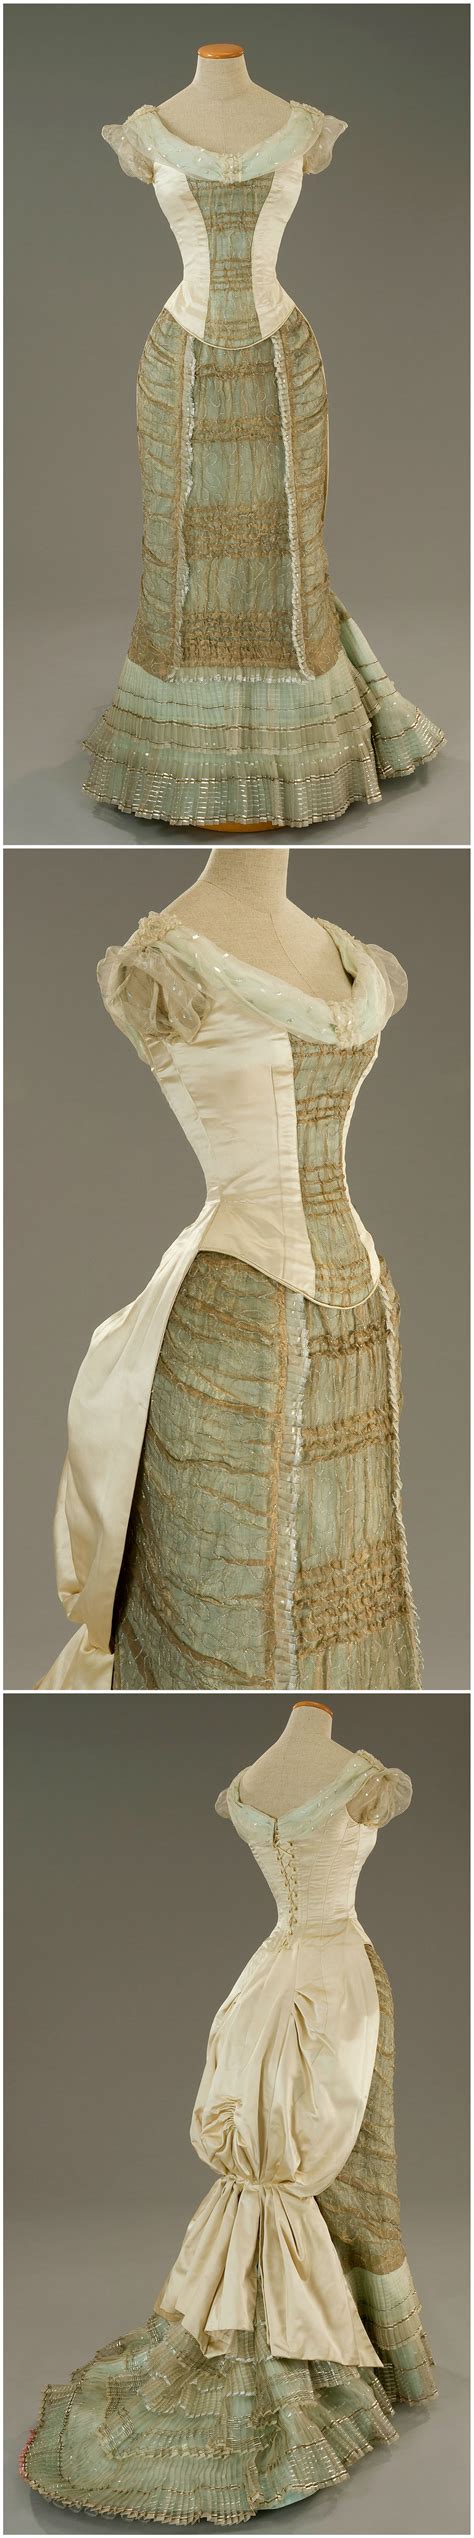 1870s Style Dress Worn By Winona Ryder In The Role Of May Welland In